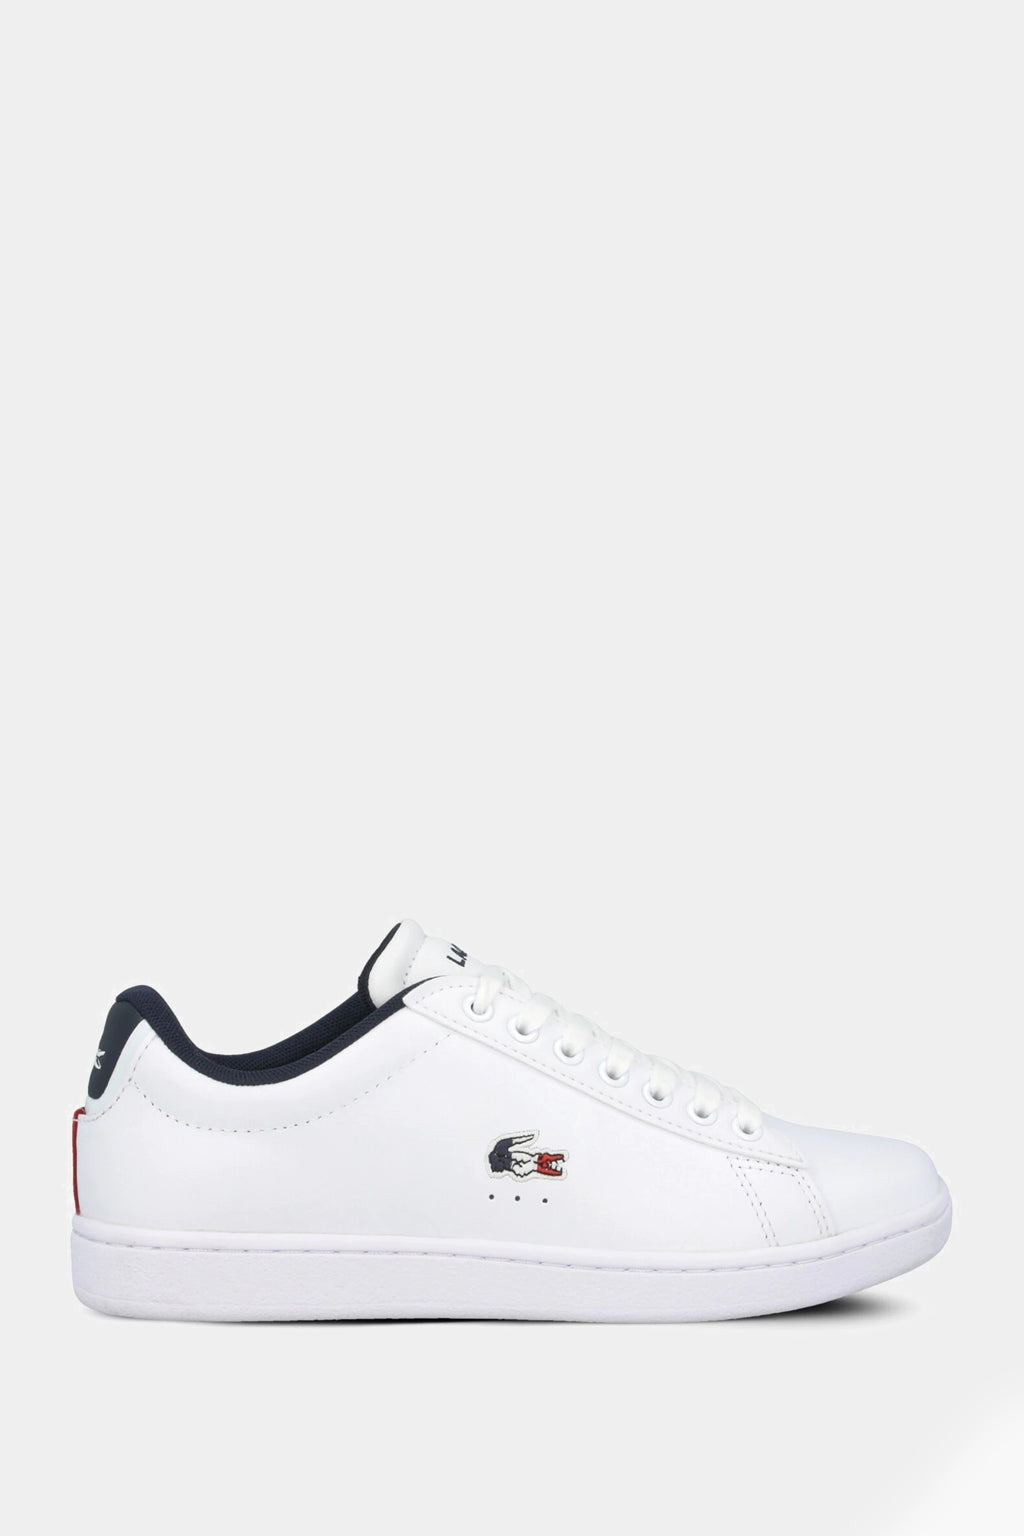 Lacoste - Carnaby Evo Tri Sneakers